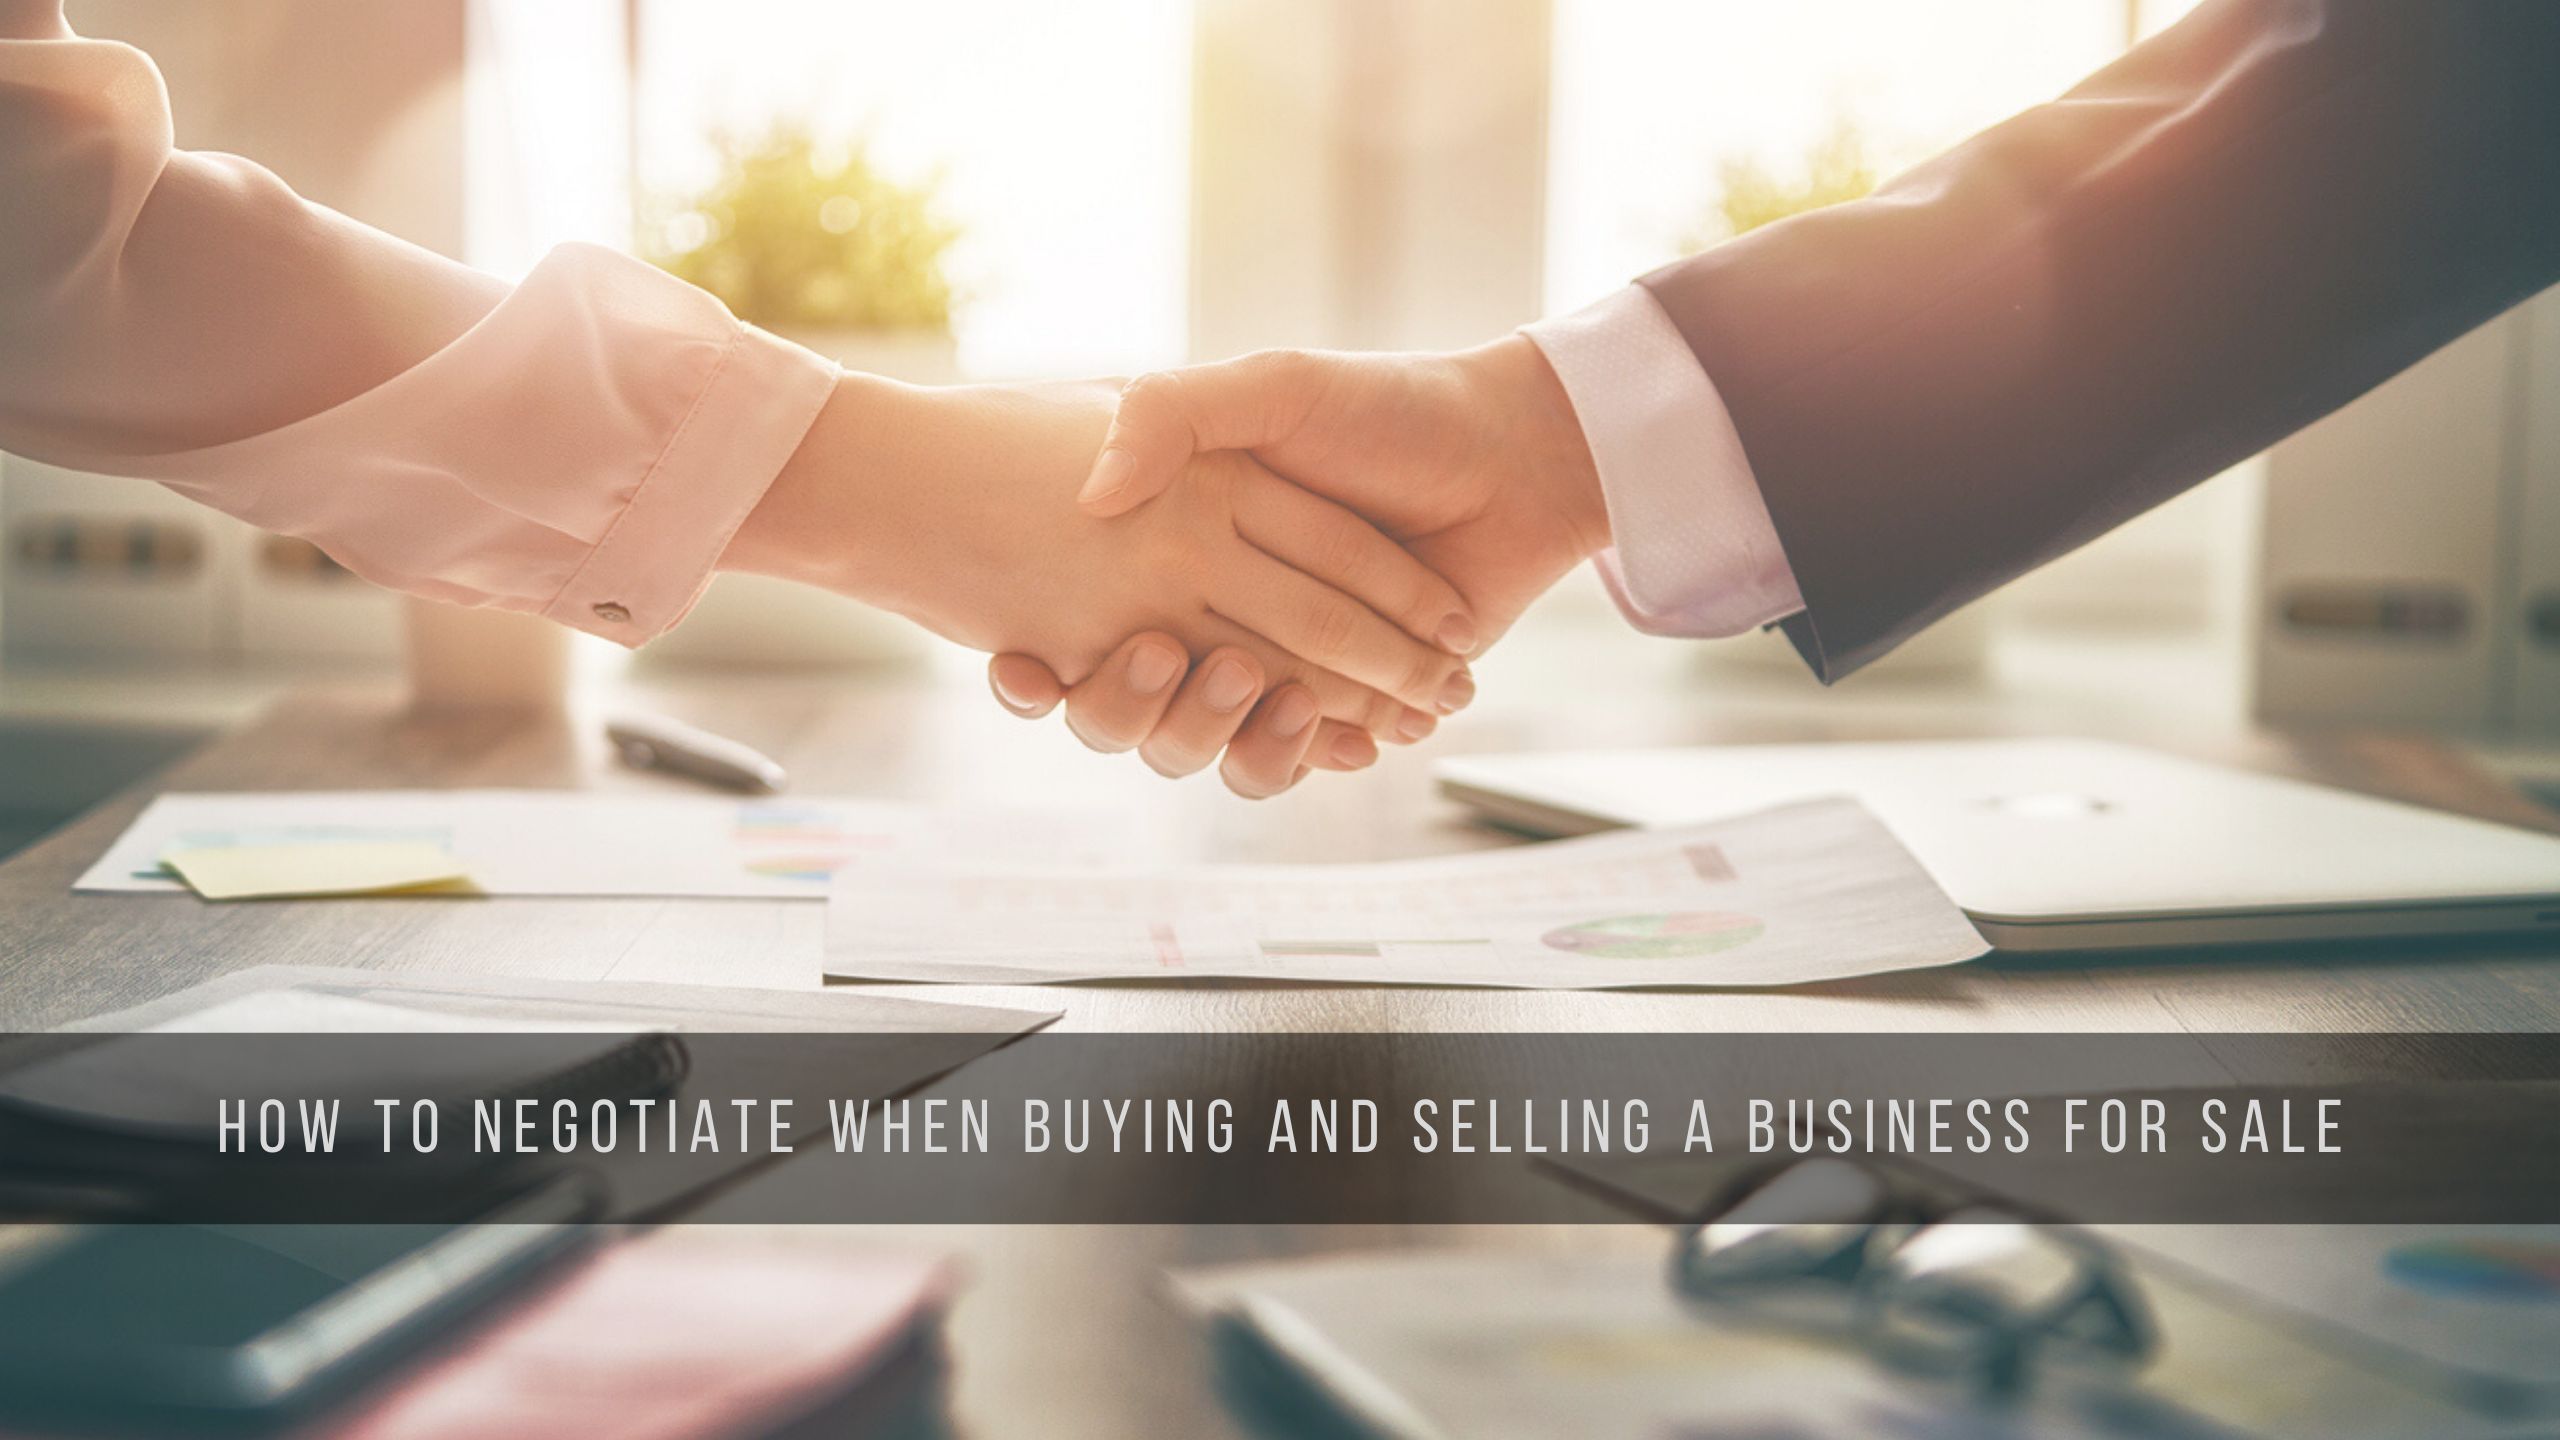 Tips to Negotiate When Buying And Selling A Business For Sale